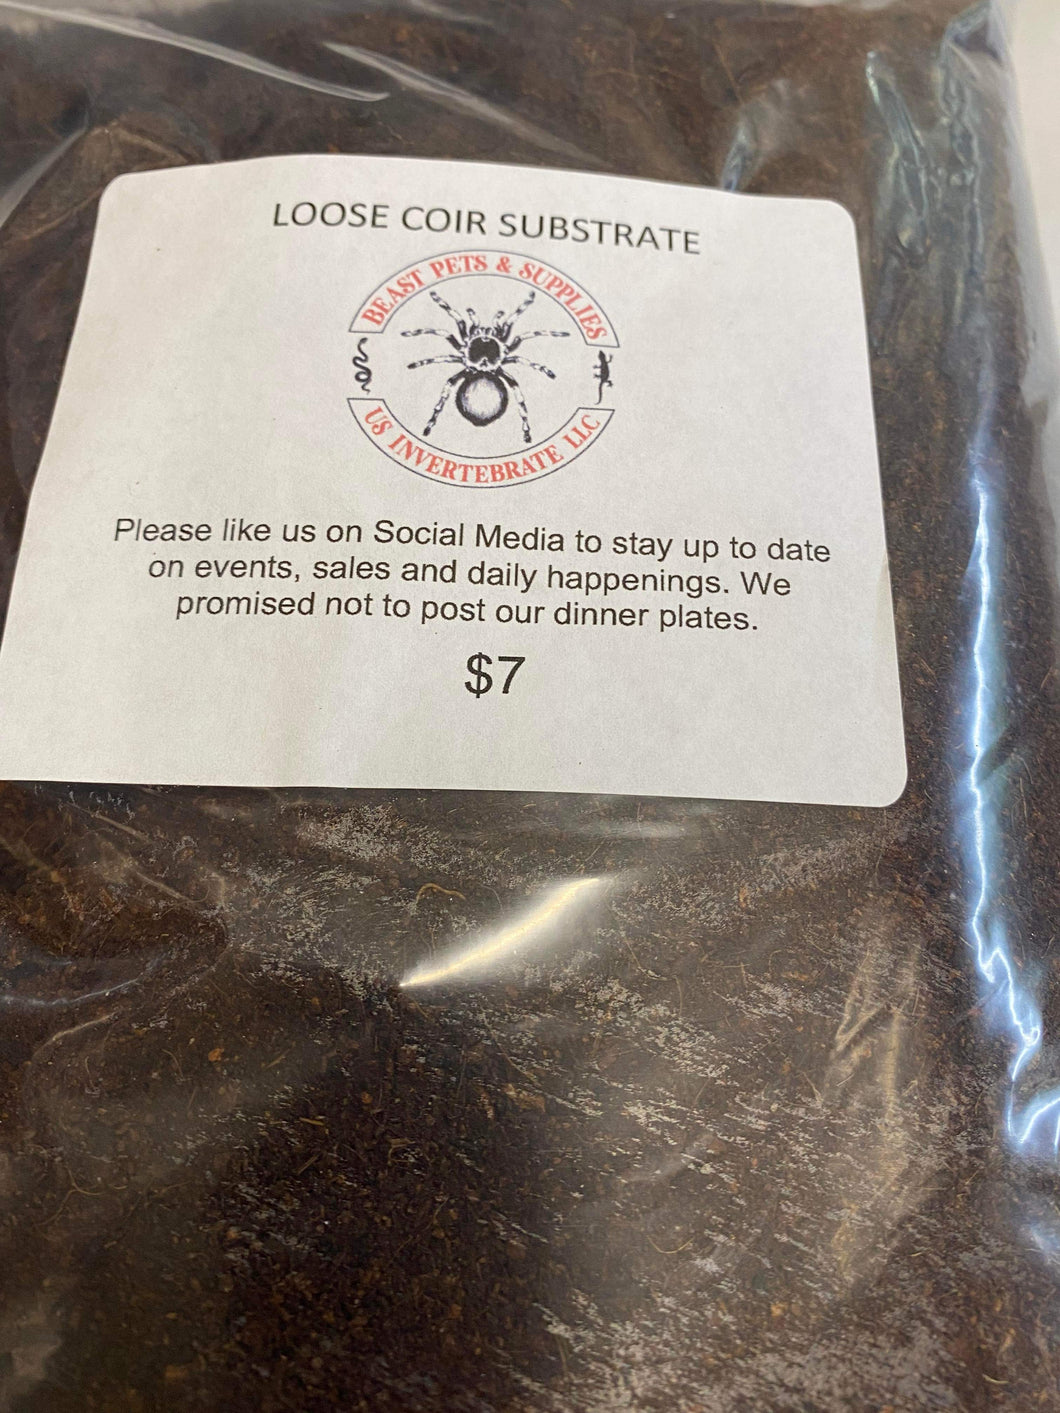 Loose Coir Substrate